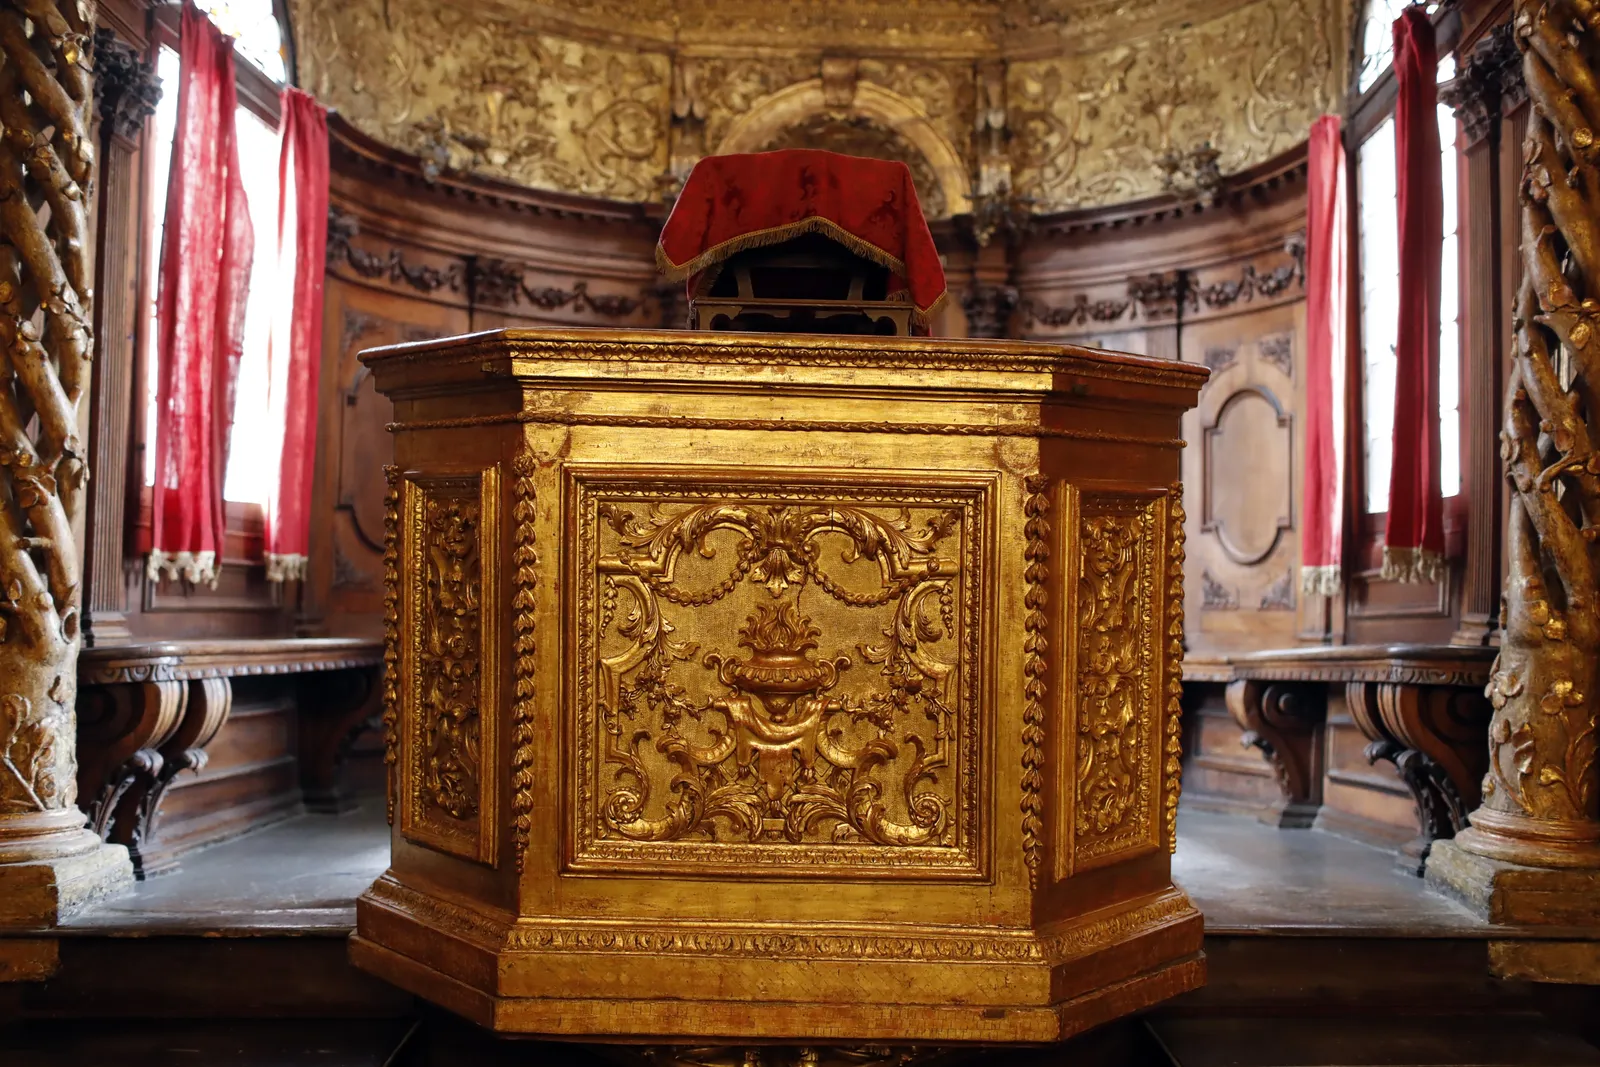 Inside the Effort to Restore Synagogues in Venice's 500-Year-Old Jewish Ghetto